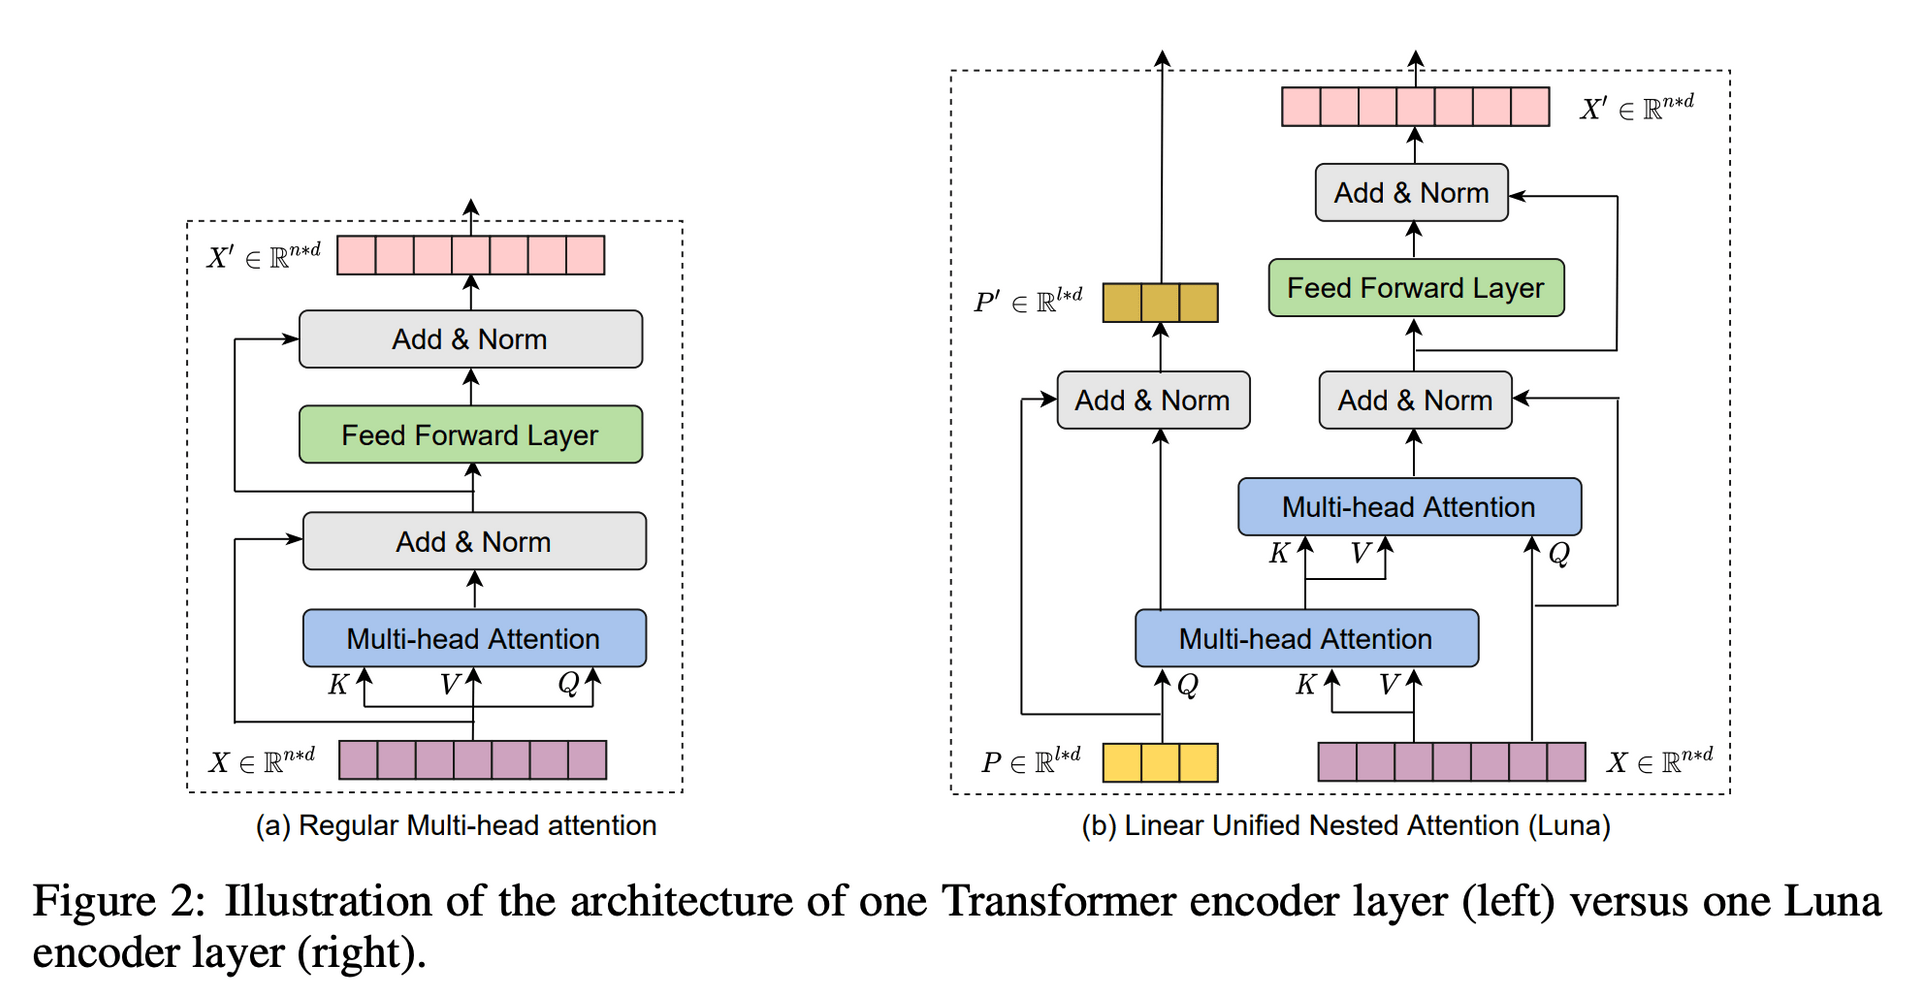 Sooftware NLP - Luna: Linear Unified Nested Attention